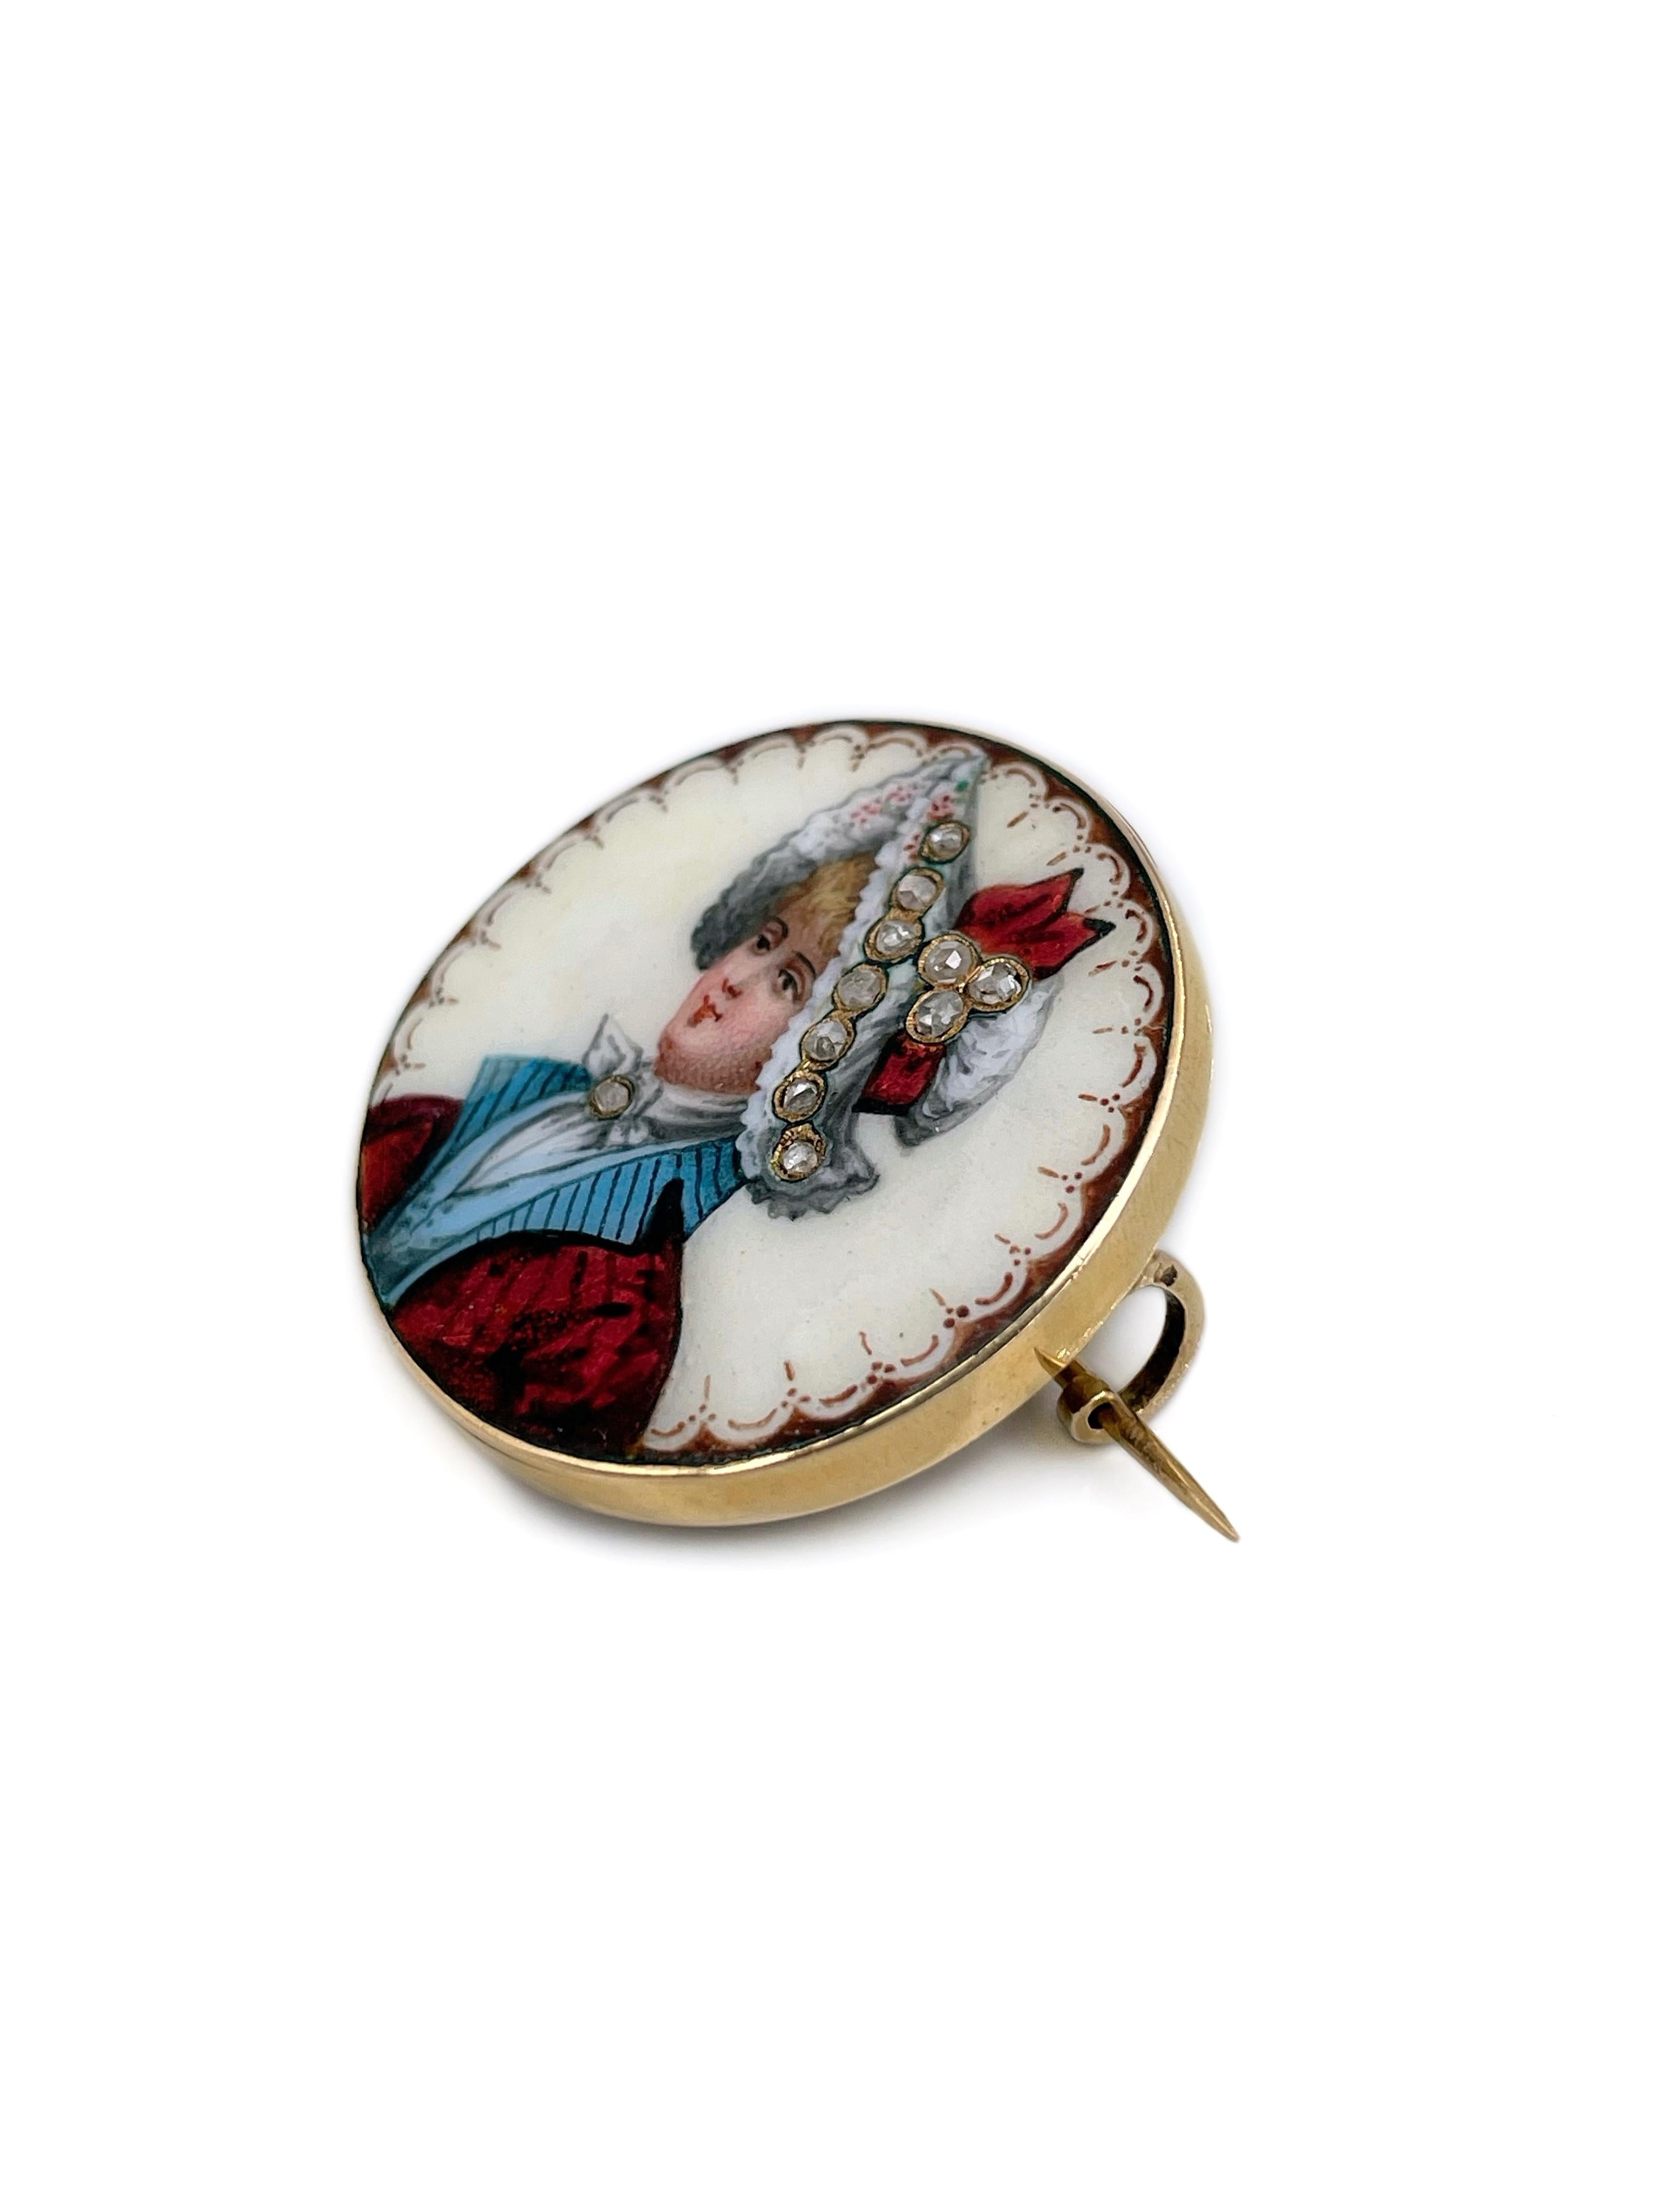 This is a lovely Victorian round pin brooch crafted in 18K yellow gold. The piece features a detailed miniature portrait of a lady. It is hand painted in colourful enamel. 

The brooch is encrusted with 11 rose cut diamonds. 

Has a C clasp.